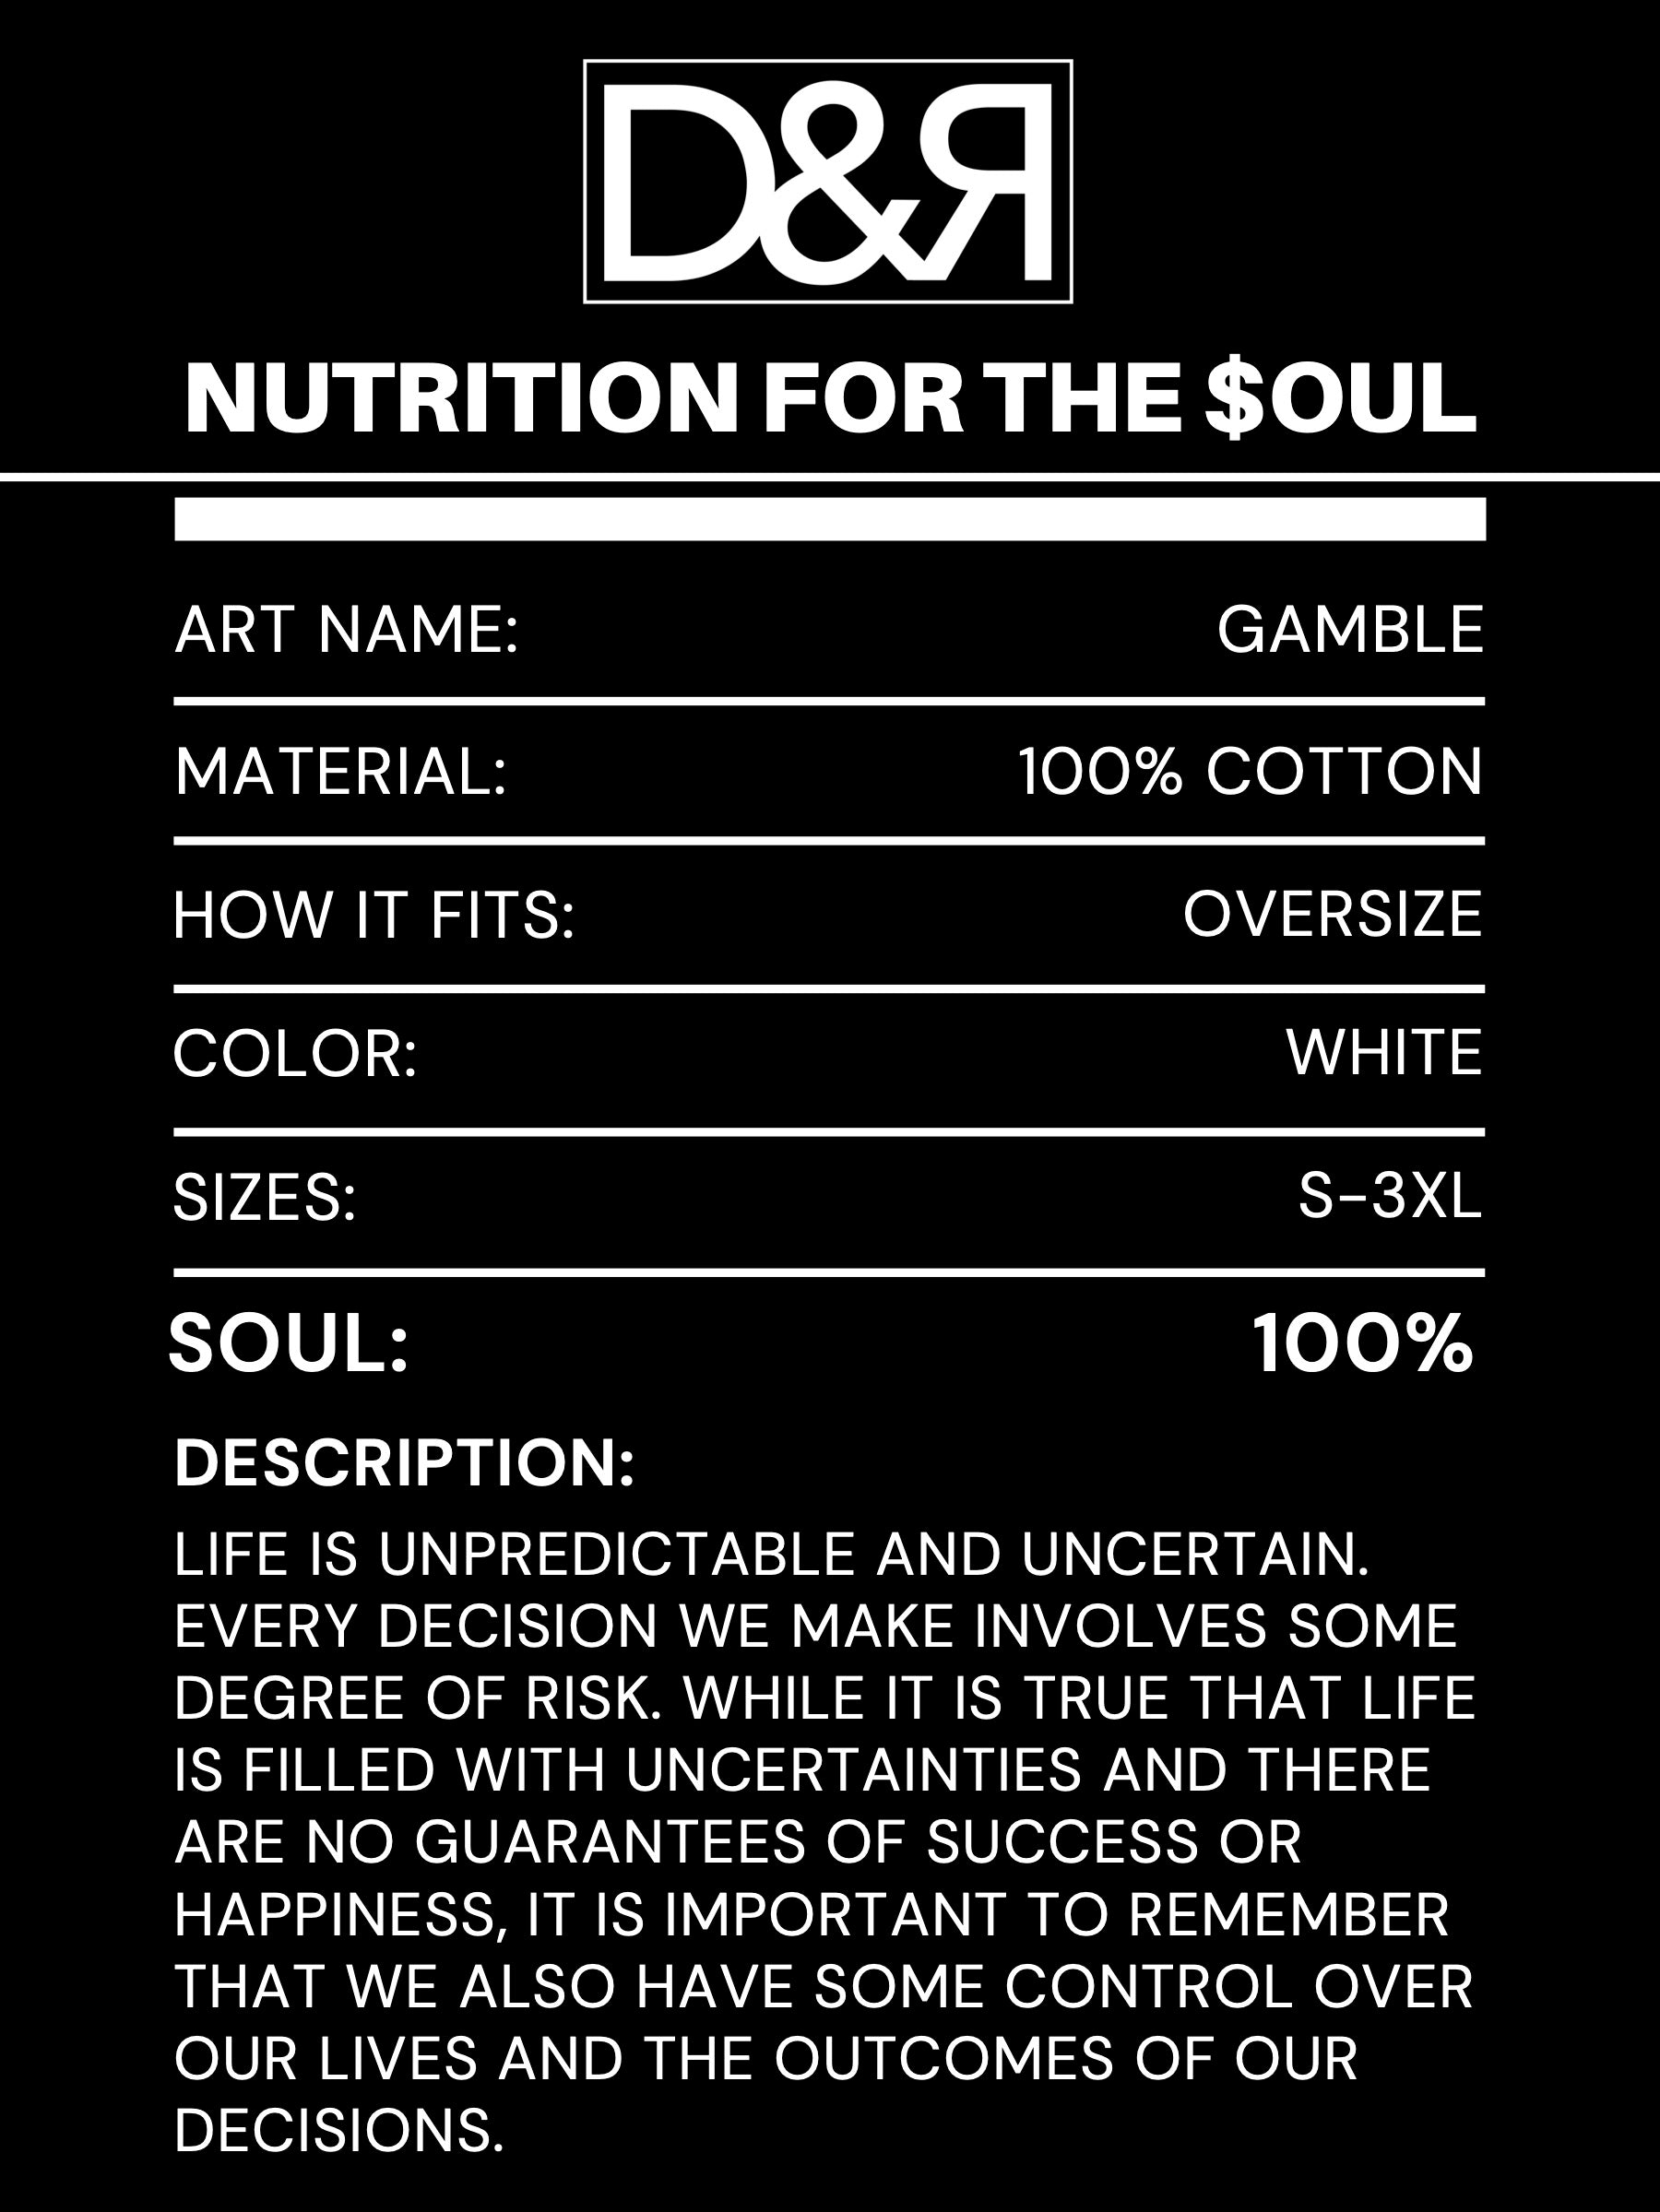 Don't Gamble With Your Soul